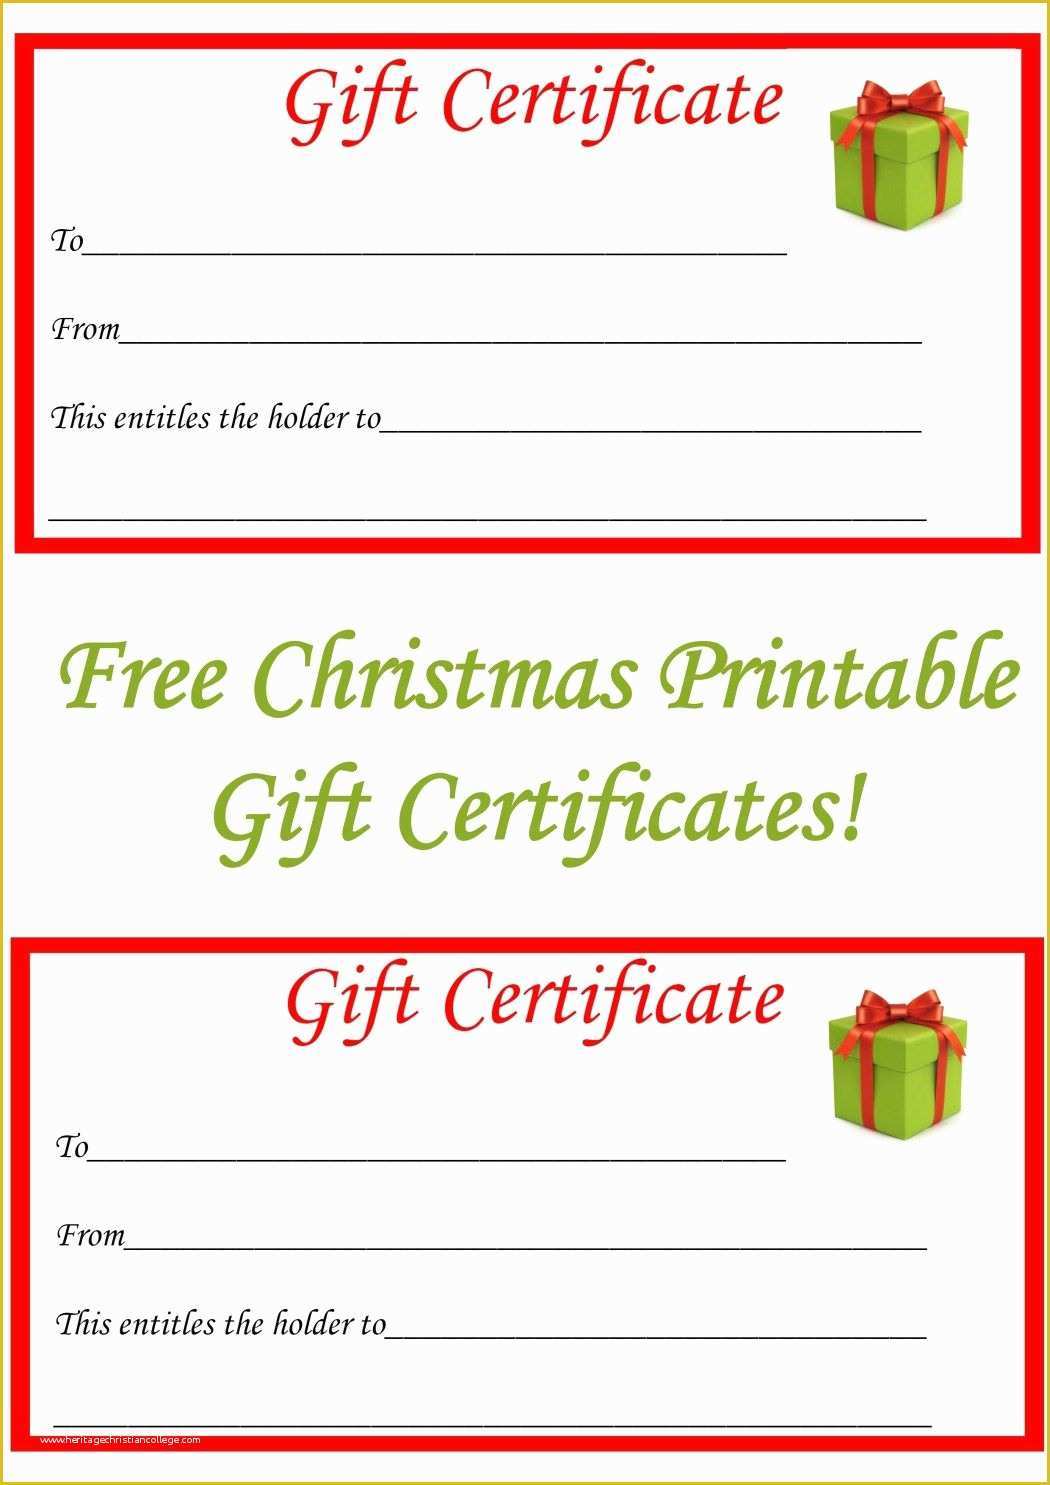 Christmas Blank Gift Certificate Template Free Of Best 25 Printable T Certificates Ideas On Pinterest